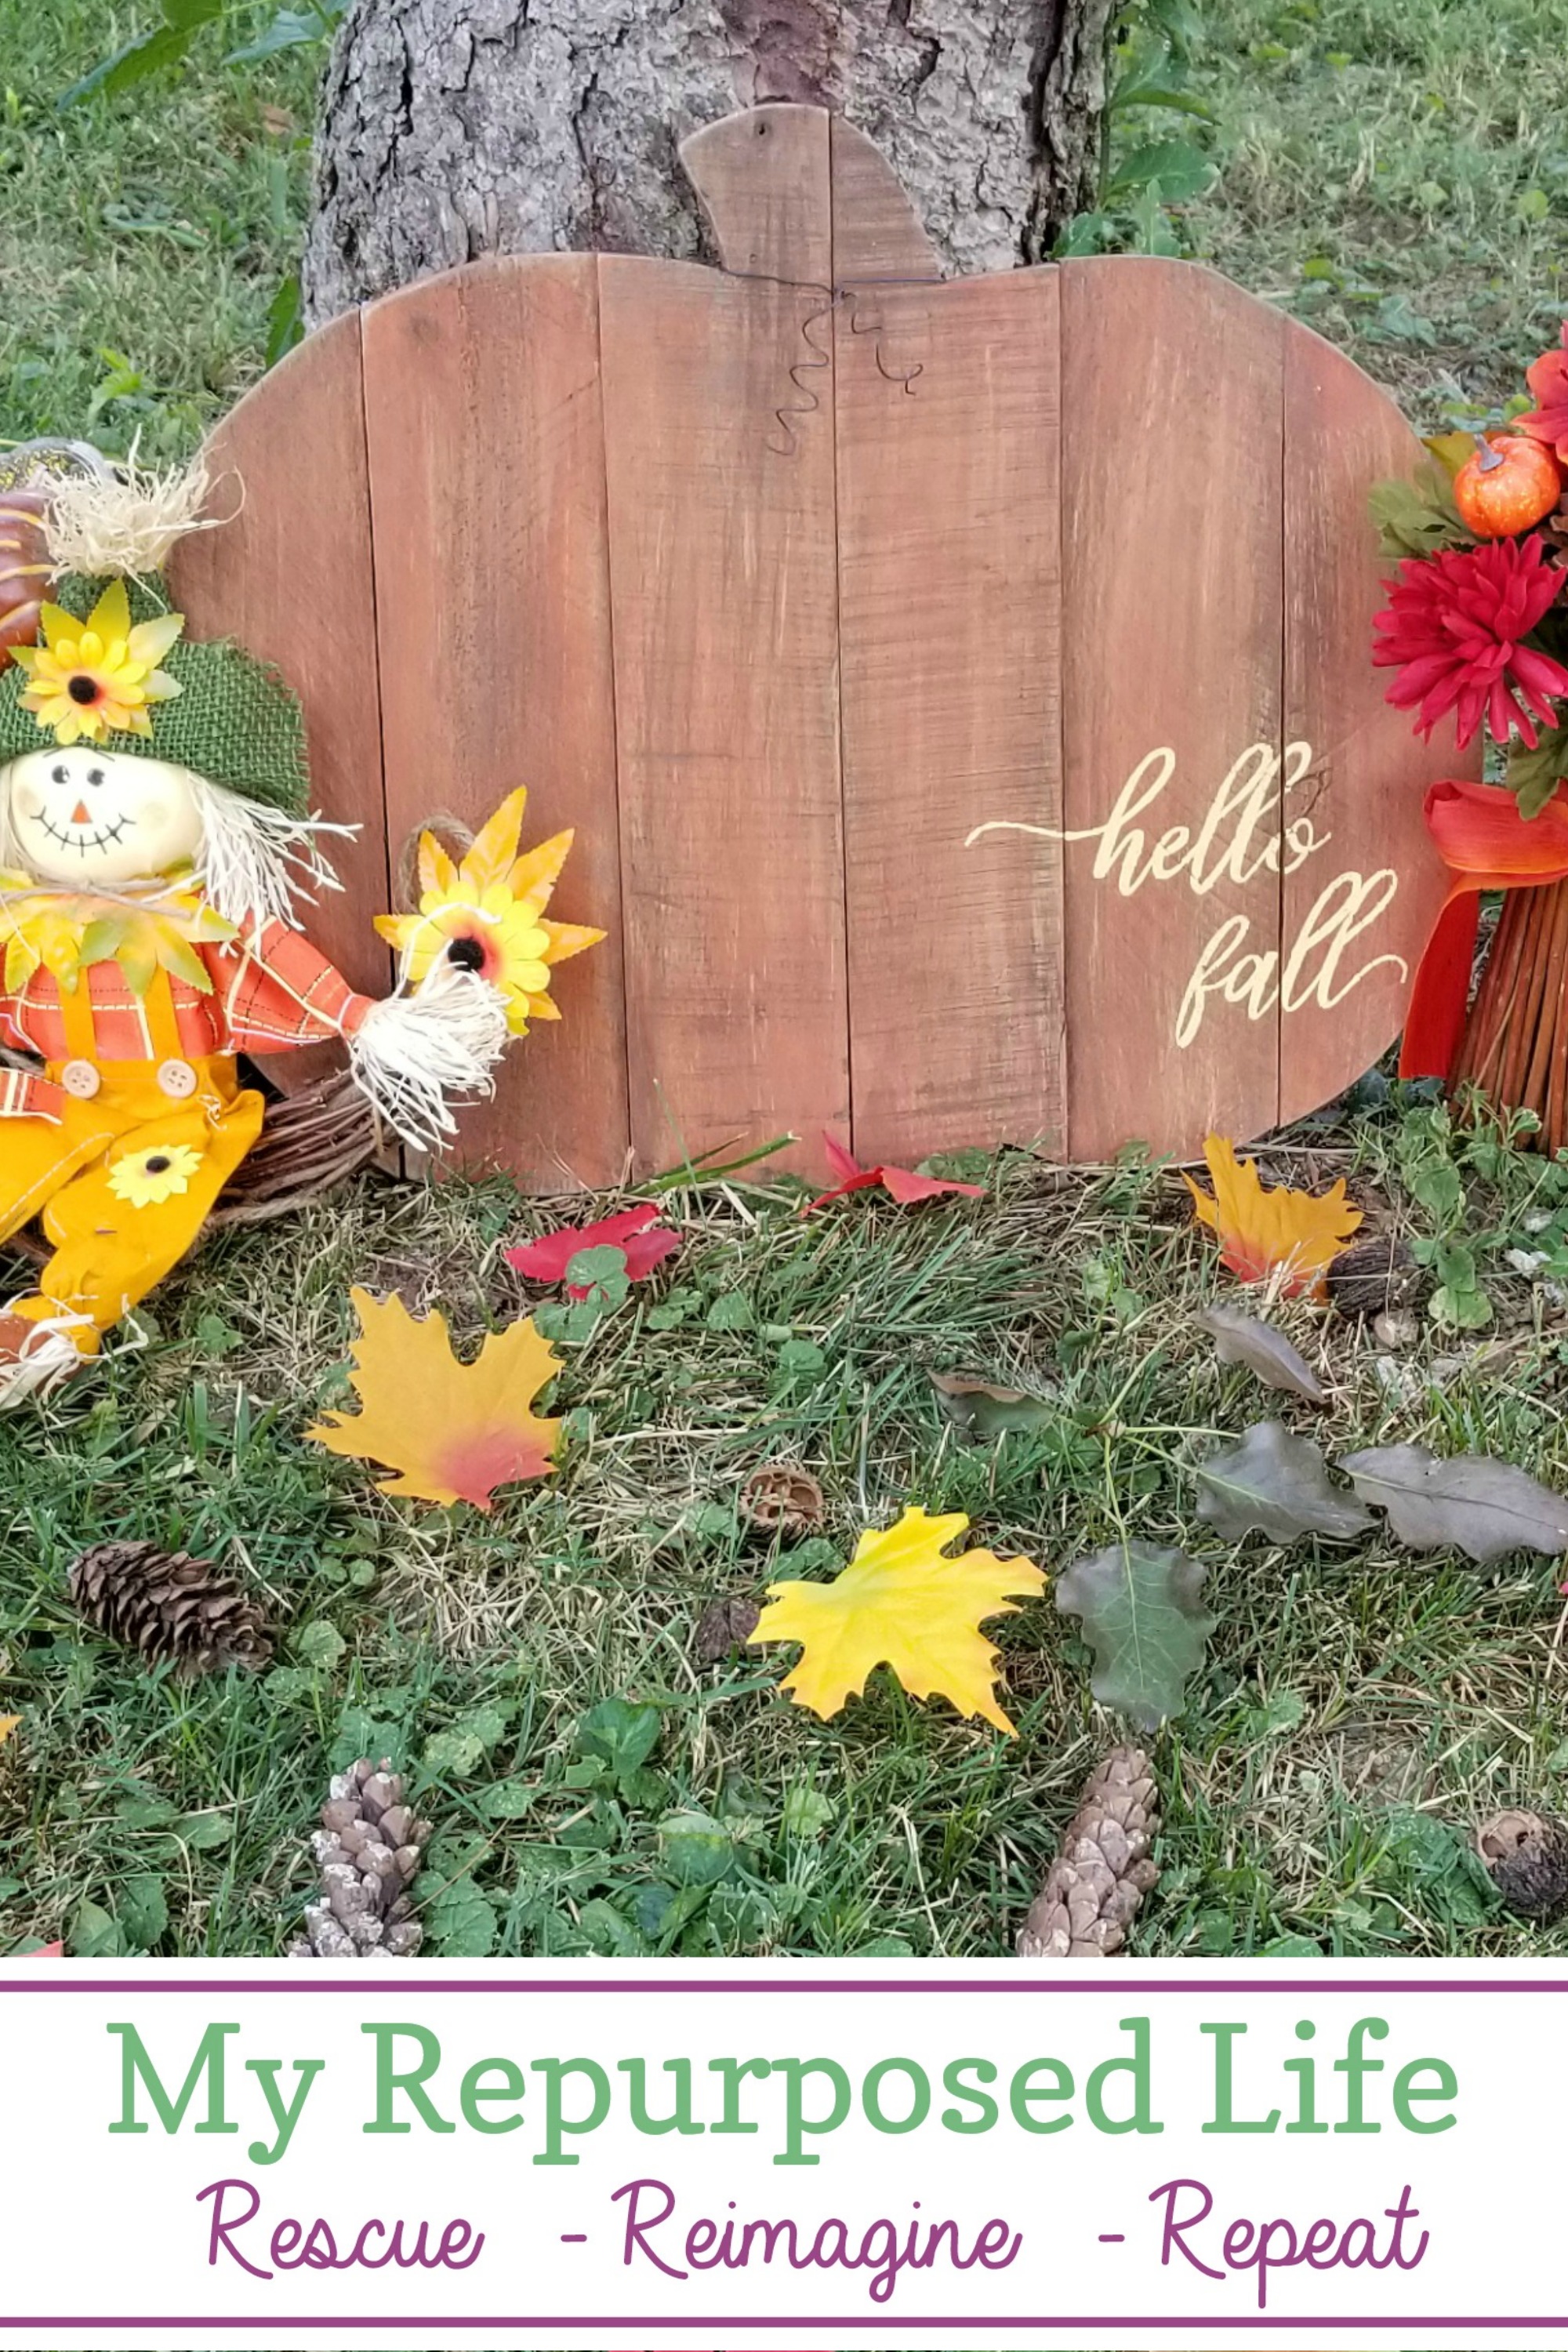 How to make a rustic pallet pumpkin hello fall sign. Step by step tips for building and painting a rustic pallet sign for Fall. #MyRepurposedLife #repurposed #upcycled #pallet #fall #pumpkin via @repurposedlife